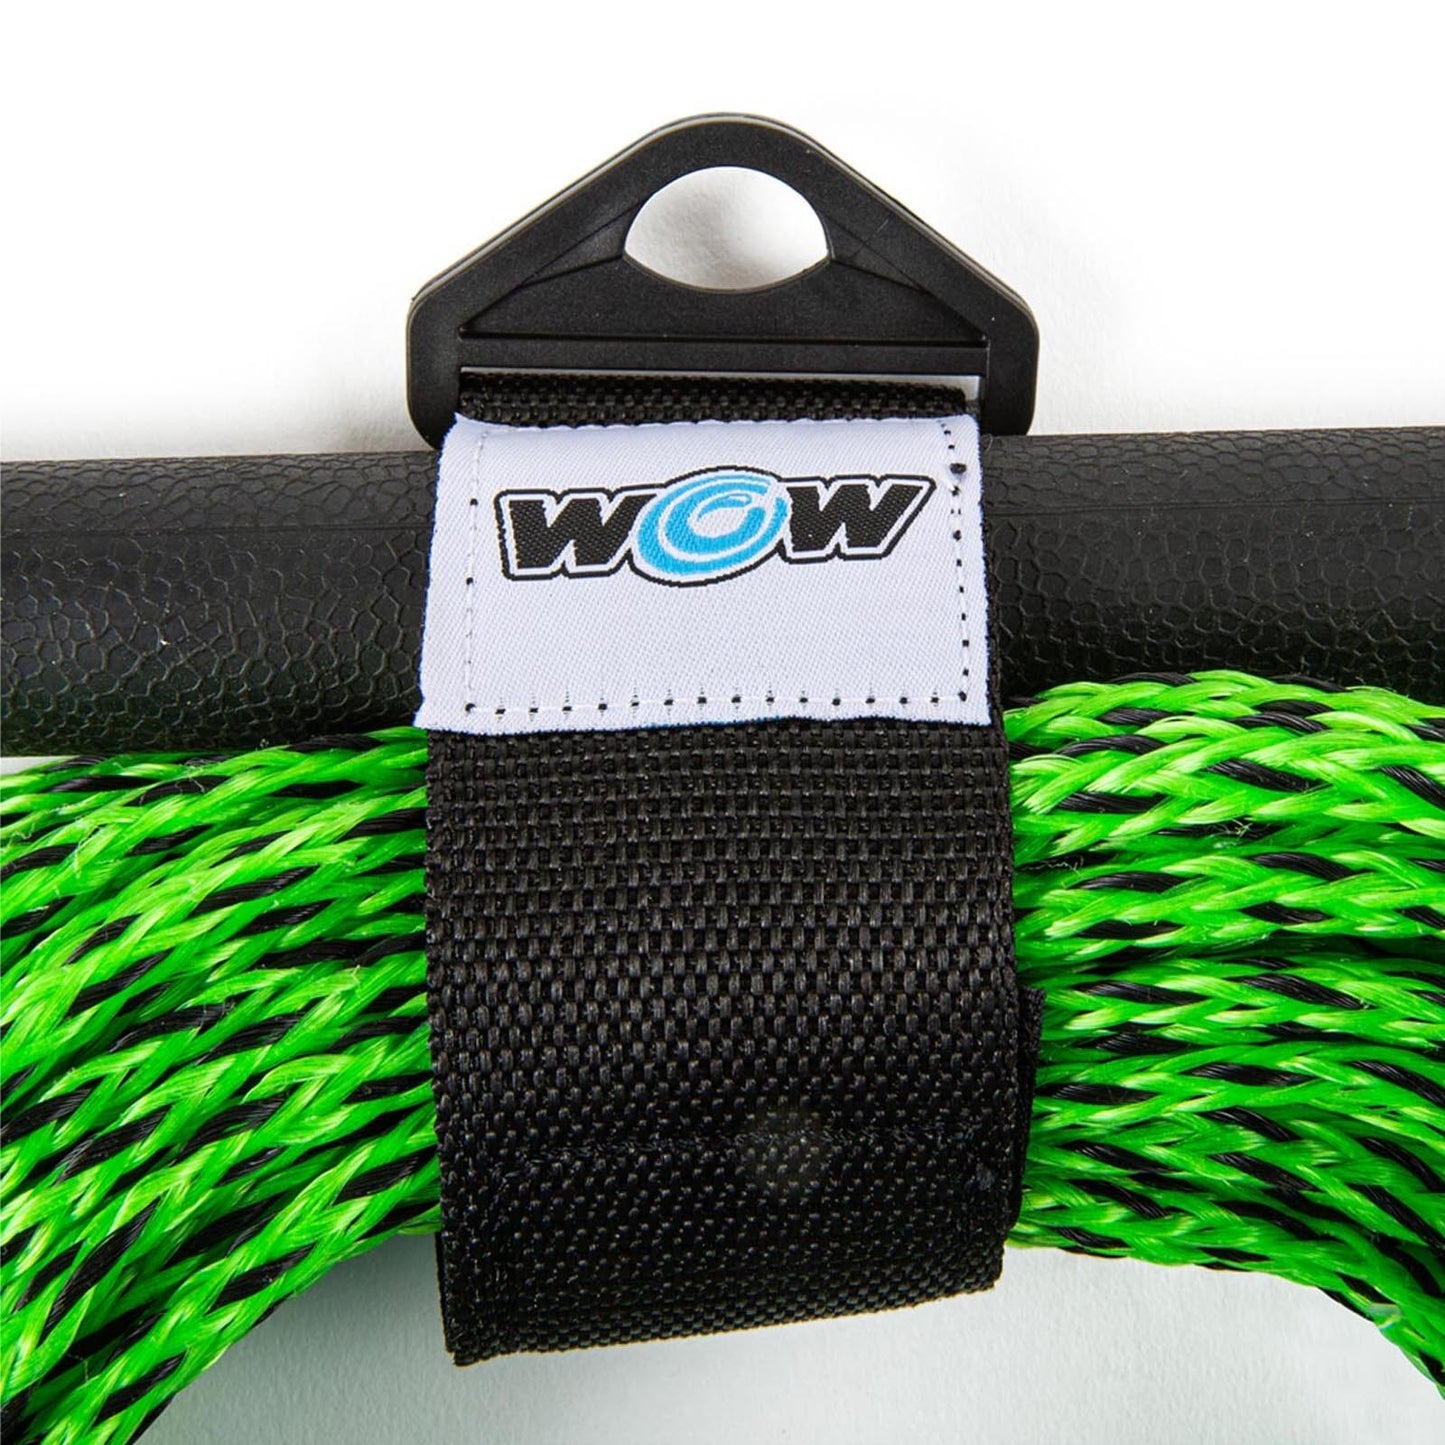 75' 1 Section Tow Rope with Rubber Handle